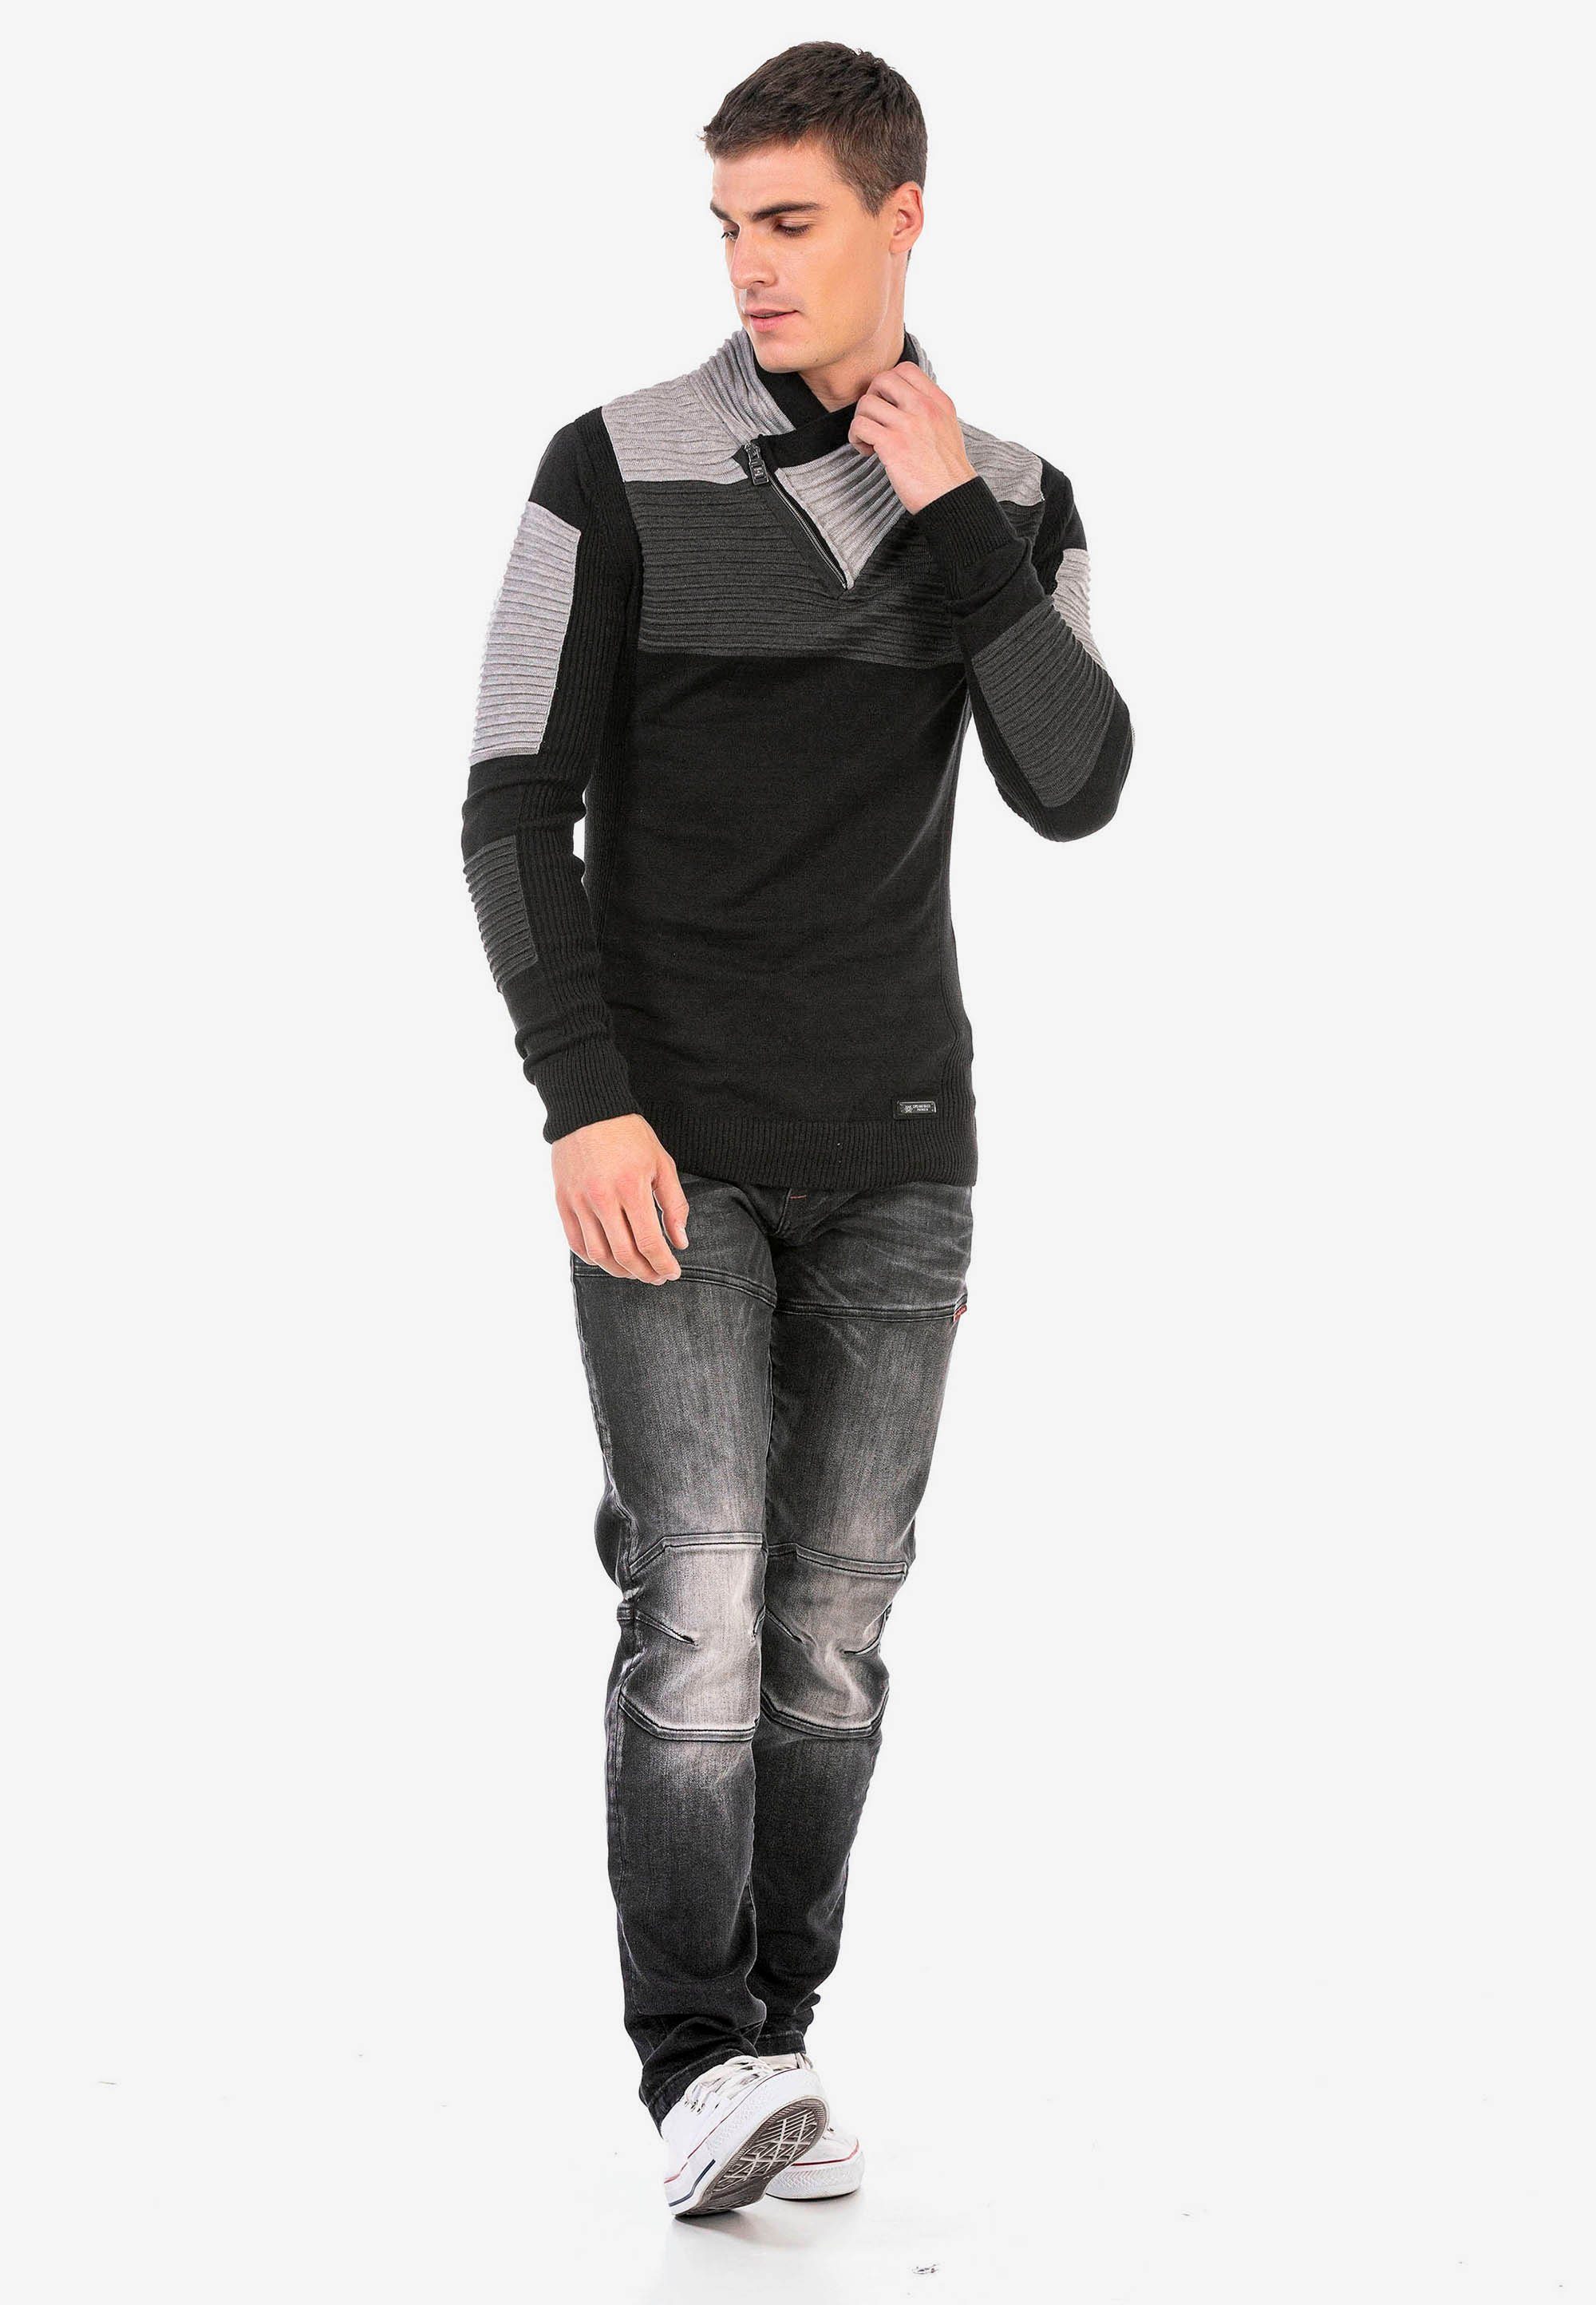 cooler Cipo mit Baxx Used-Waschung & Straight-Jeans